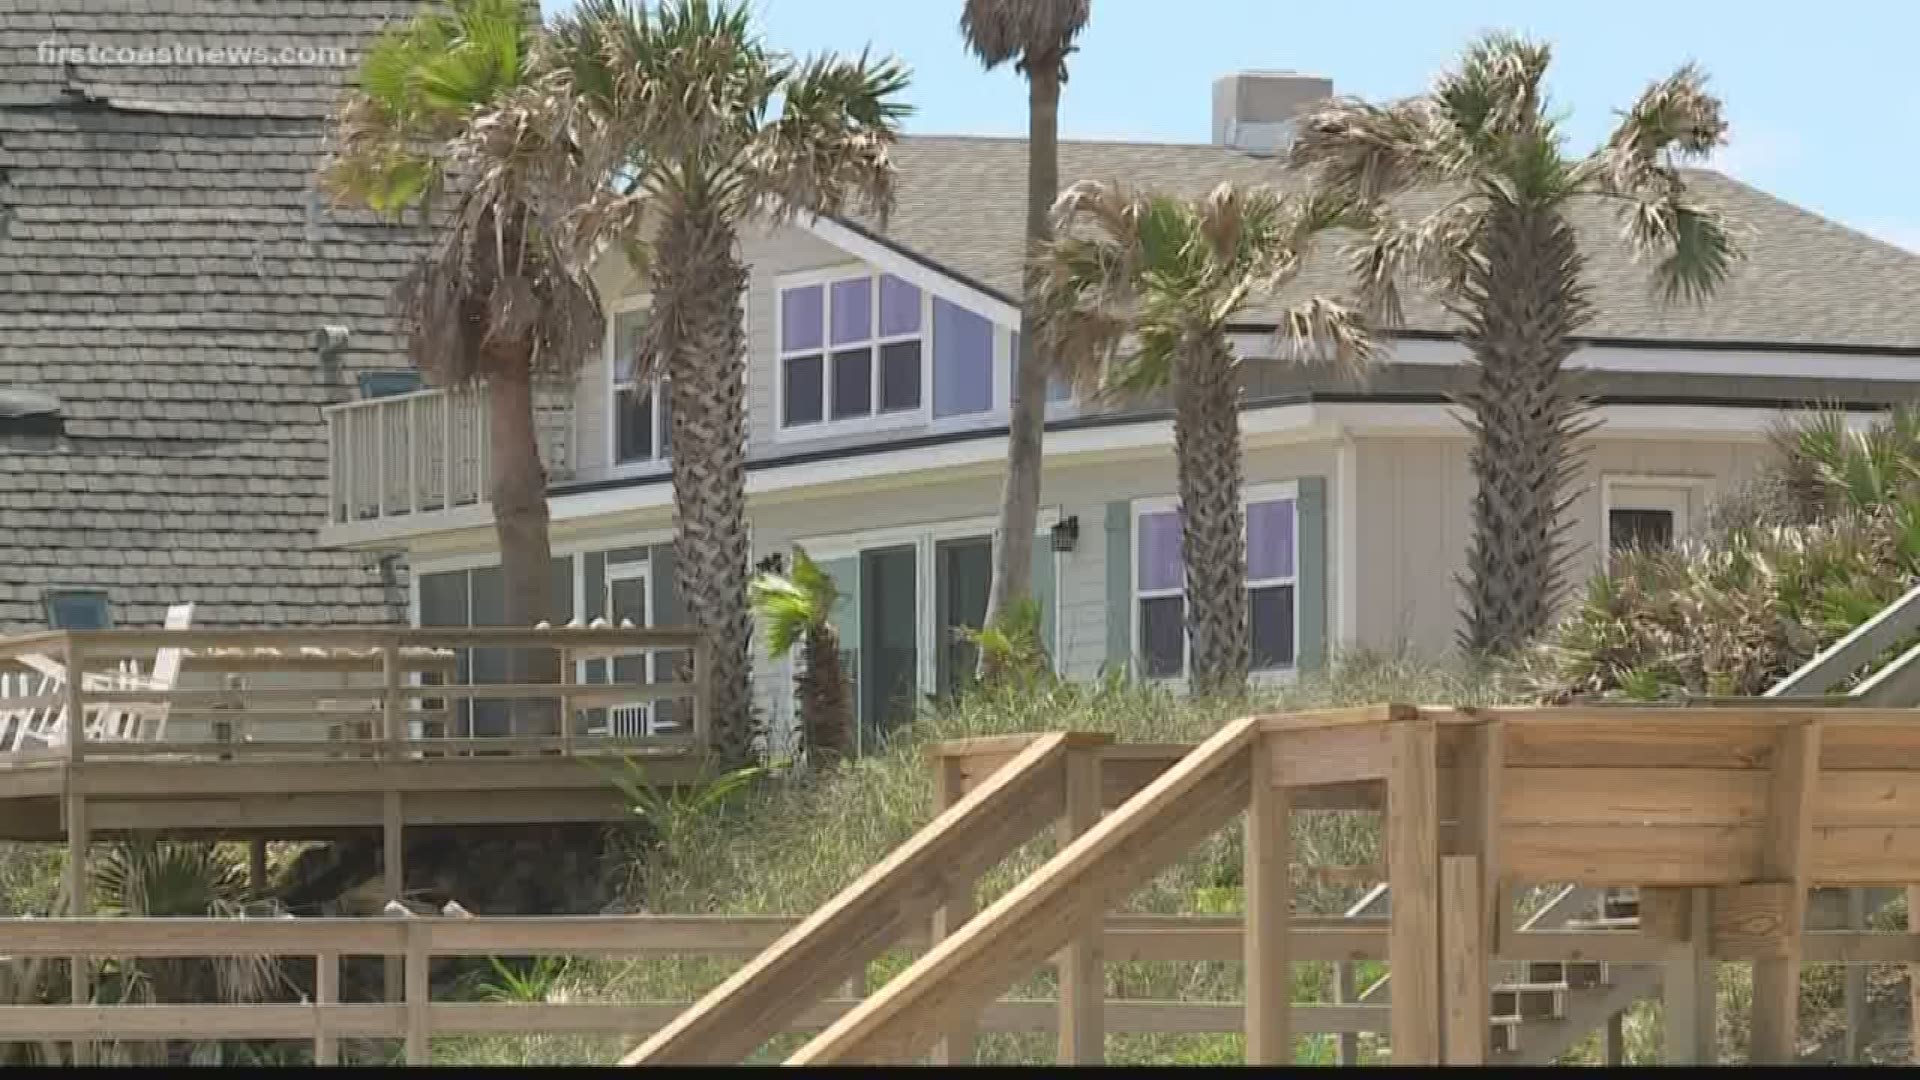 A tax is being proposed to help restore a seven mile stretch of the beaches in St. Johns County. Everyone agrees beach restoration is needed -- but there's major disagreement on how the pay for it.